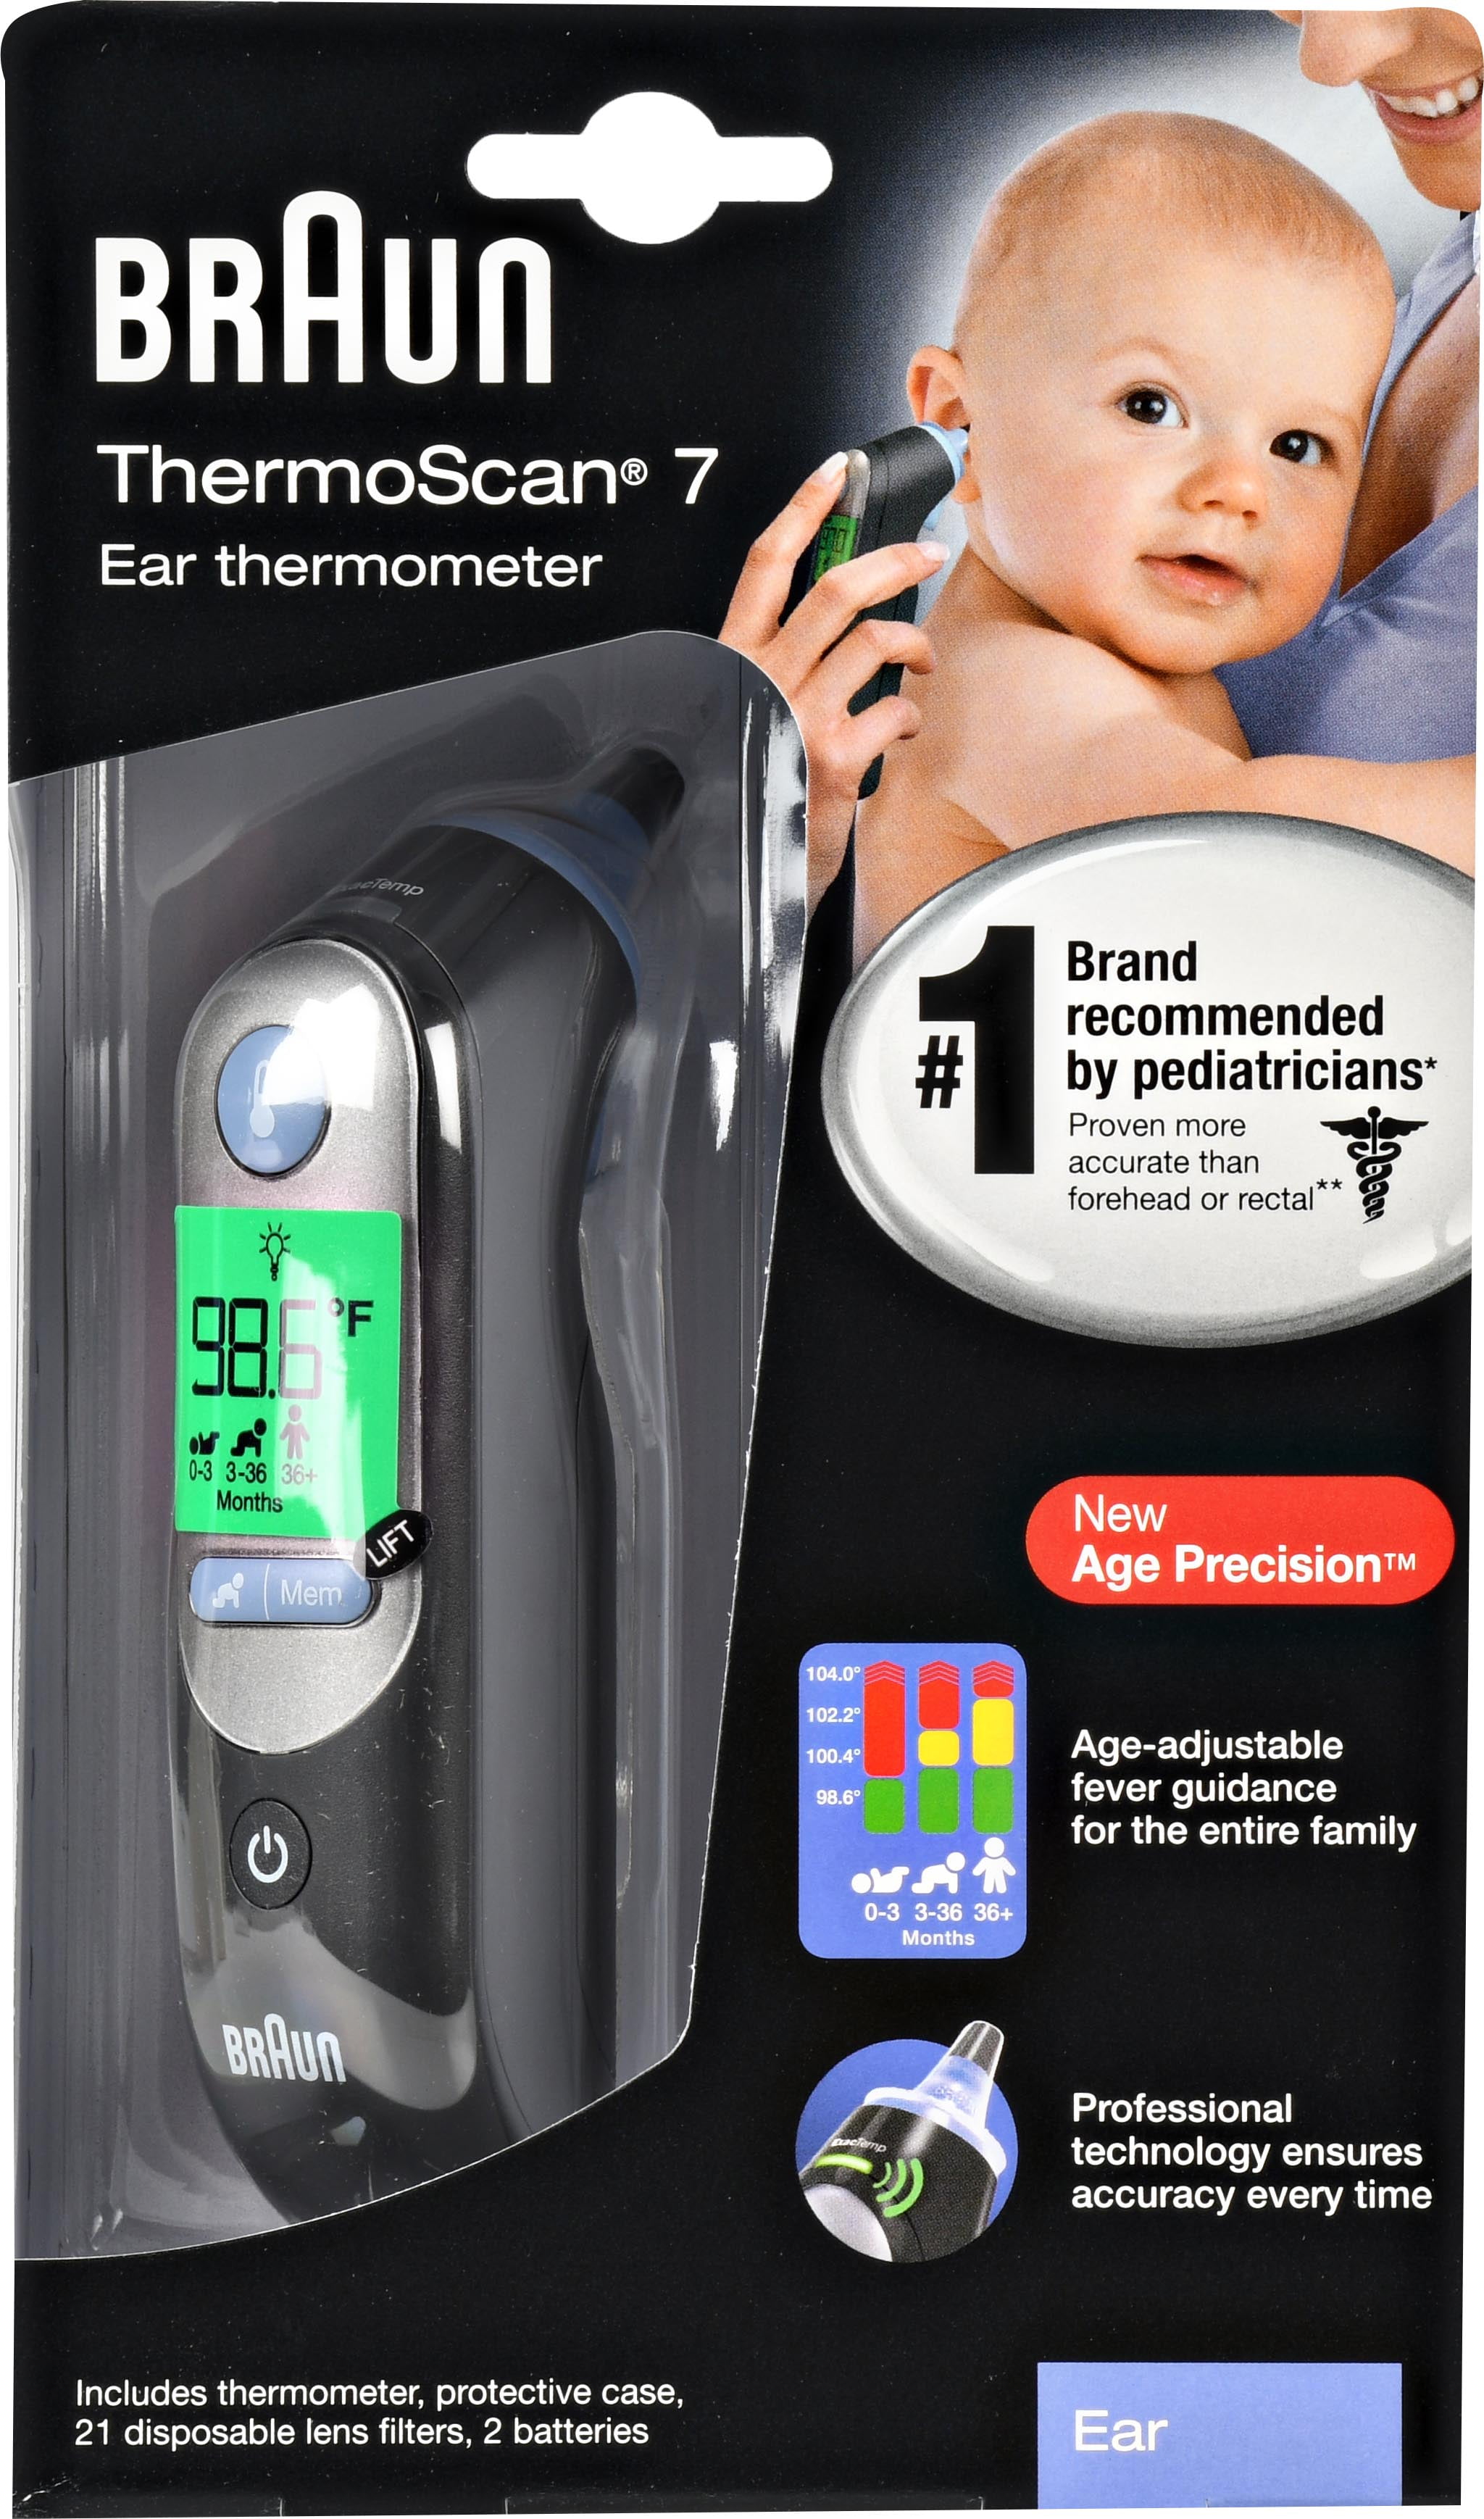 Braun Thermoscan 7 Ear Thermometer for Adults/infants Irt6520 for